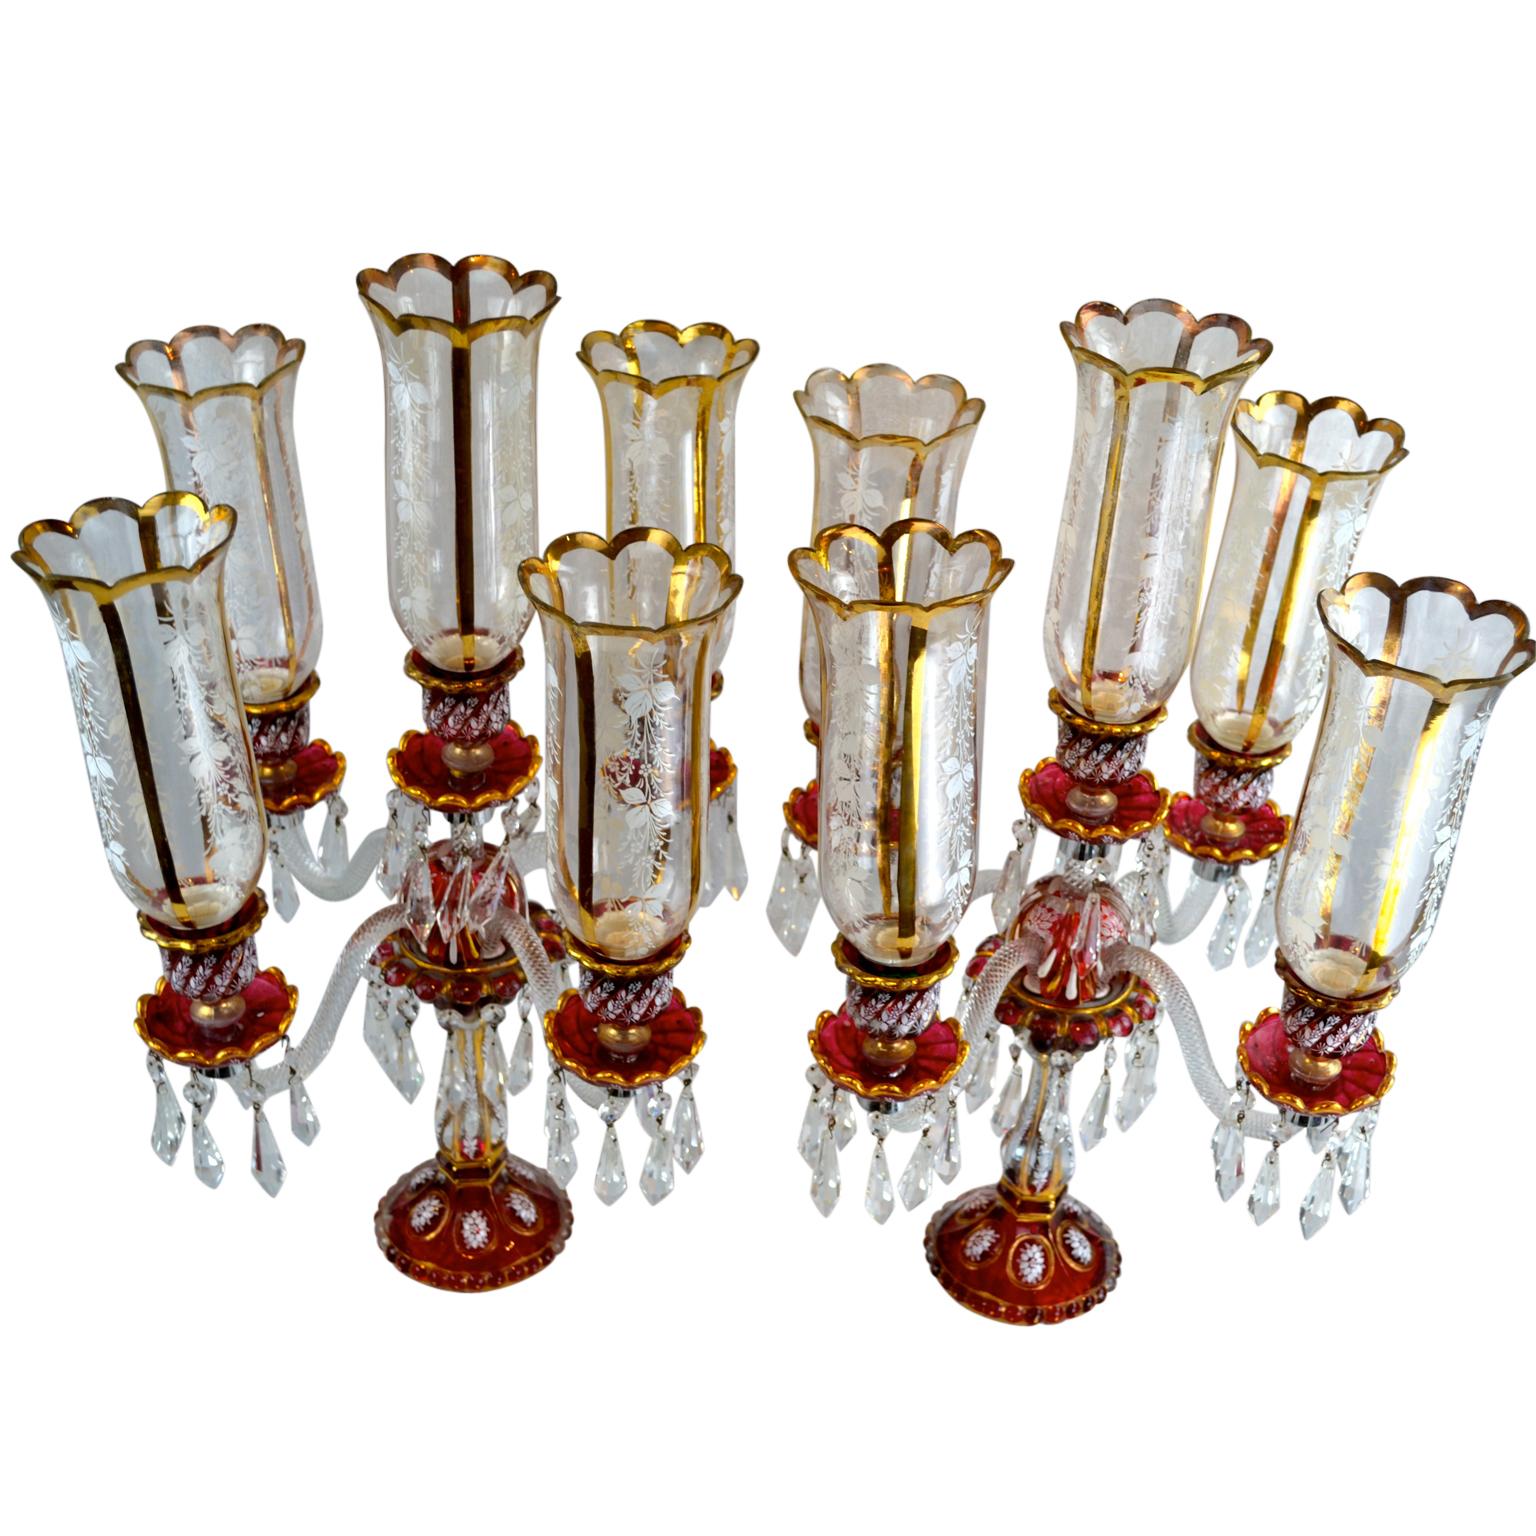 A pair of Baccarat style candelabra; much of the crystal having a ‘ruby wash’ finish and further decorated with white enamel flowers and gilt decoration; the central stem supports four candle arms and a central candle arm, each with a decorated